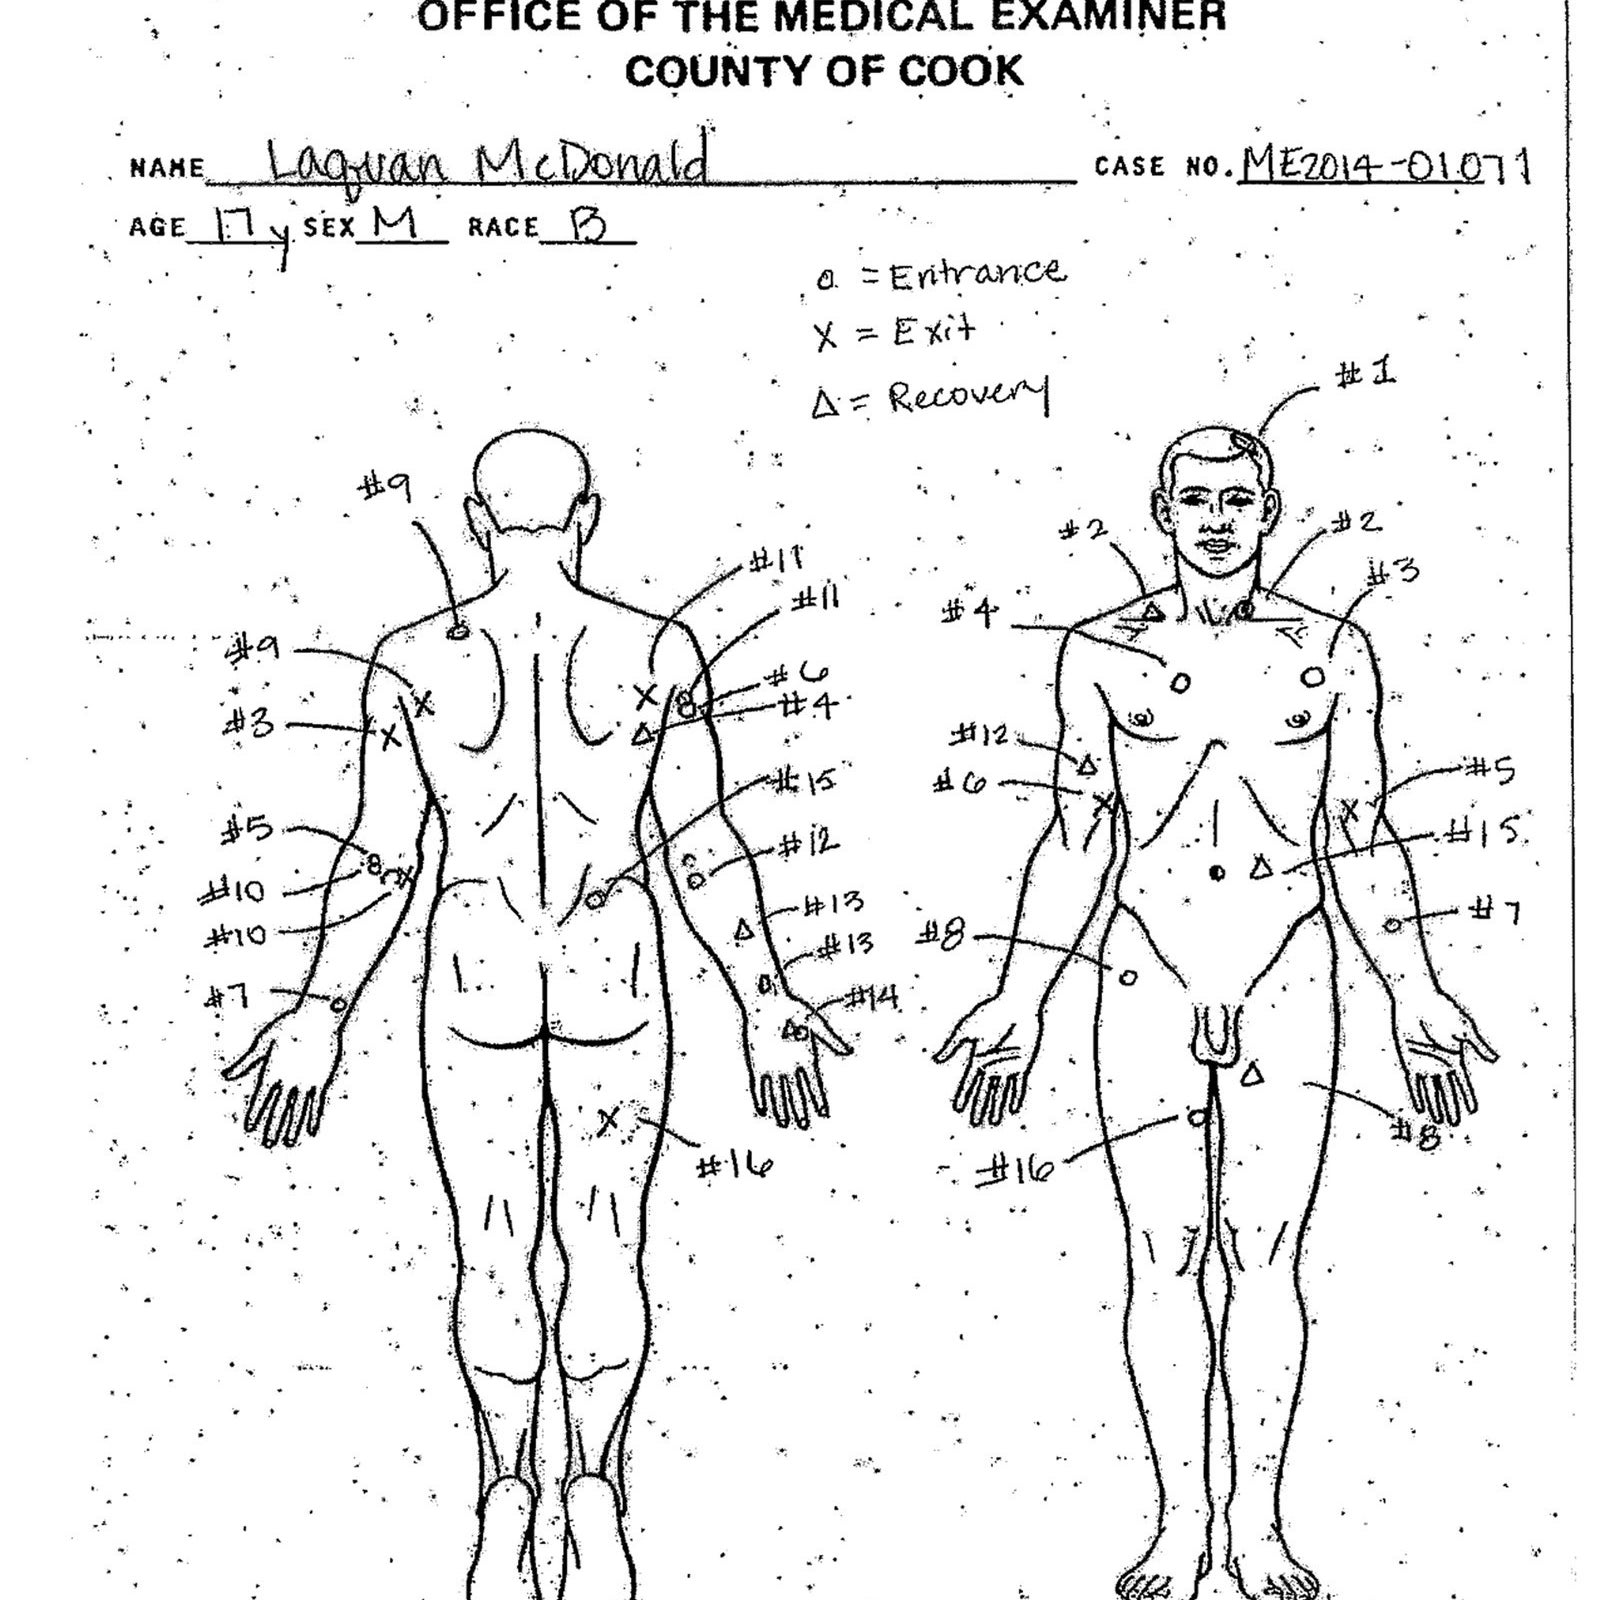 An autopsy diagram by the Cook County Medical Examiner&#x27;s office shows the location of wounds McDonald&#x27;s body.